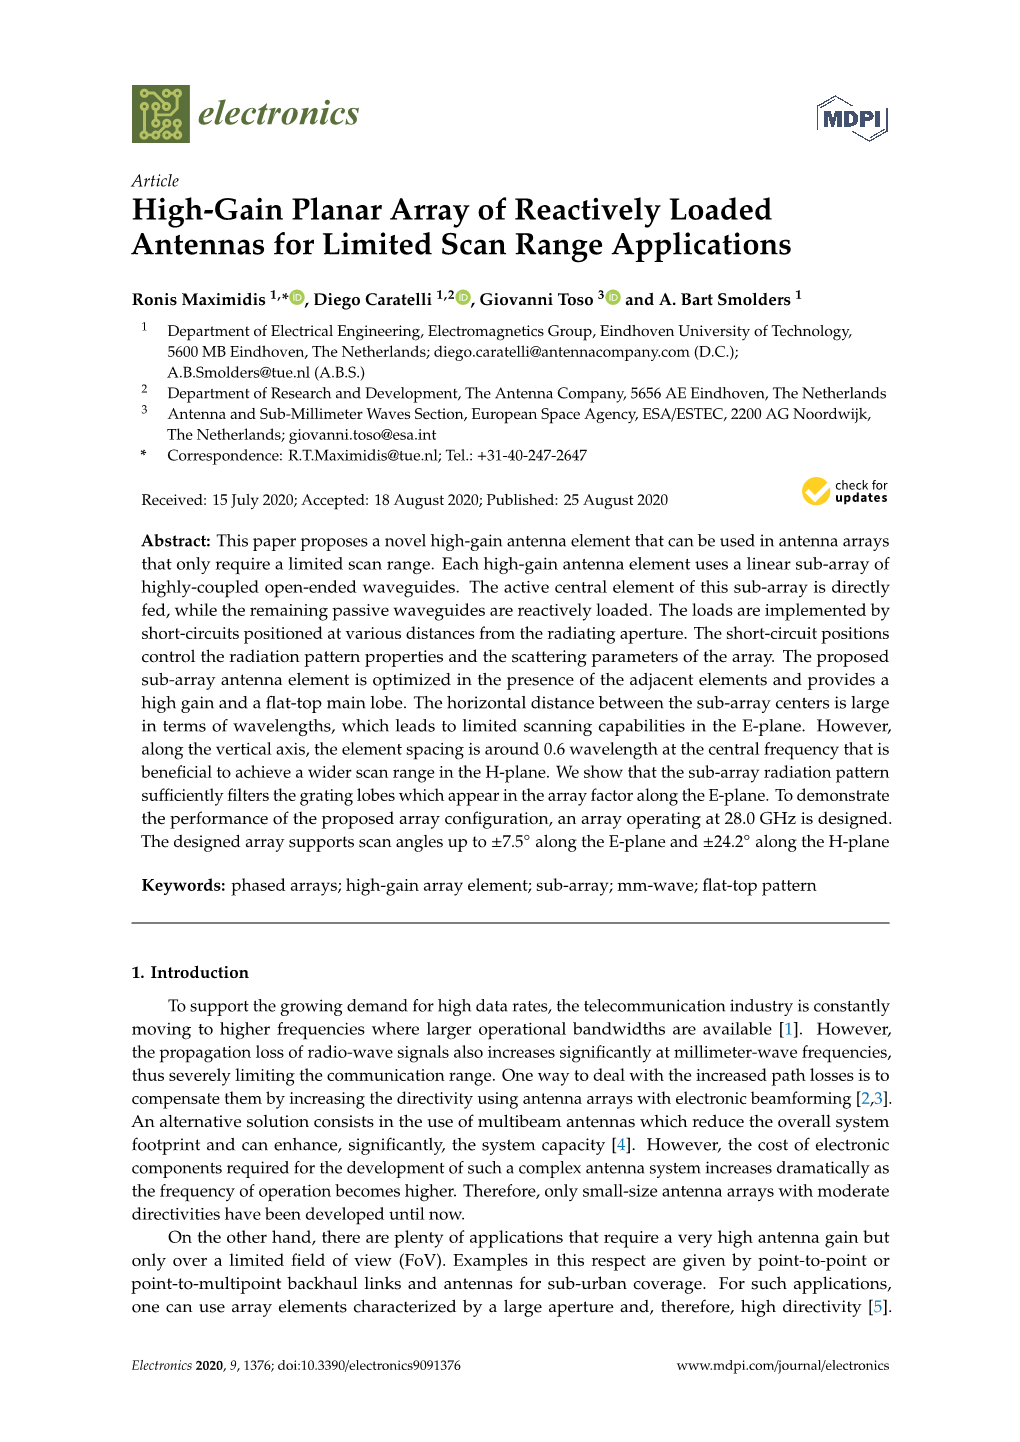 High-Gain Planar Array of Reactively Loaded Antennas for Limited Scan Range Applications